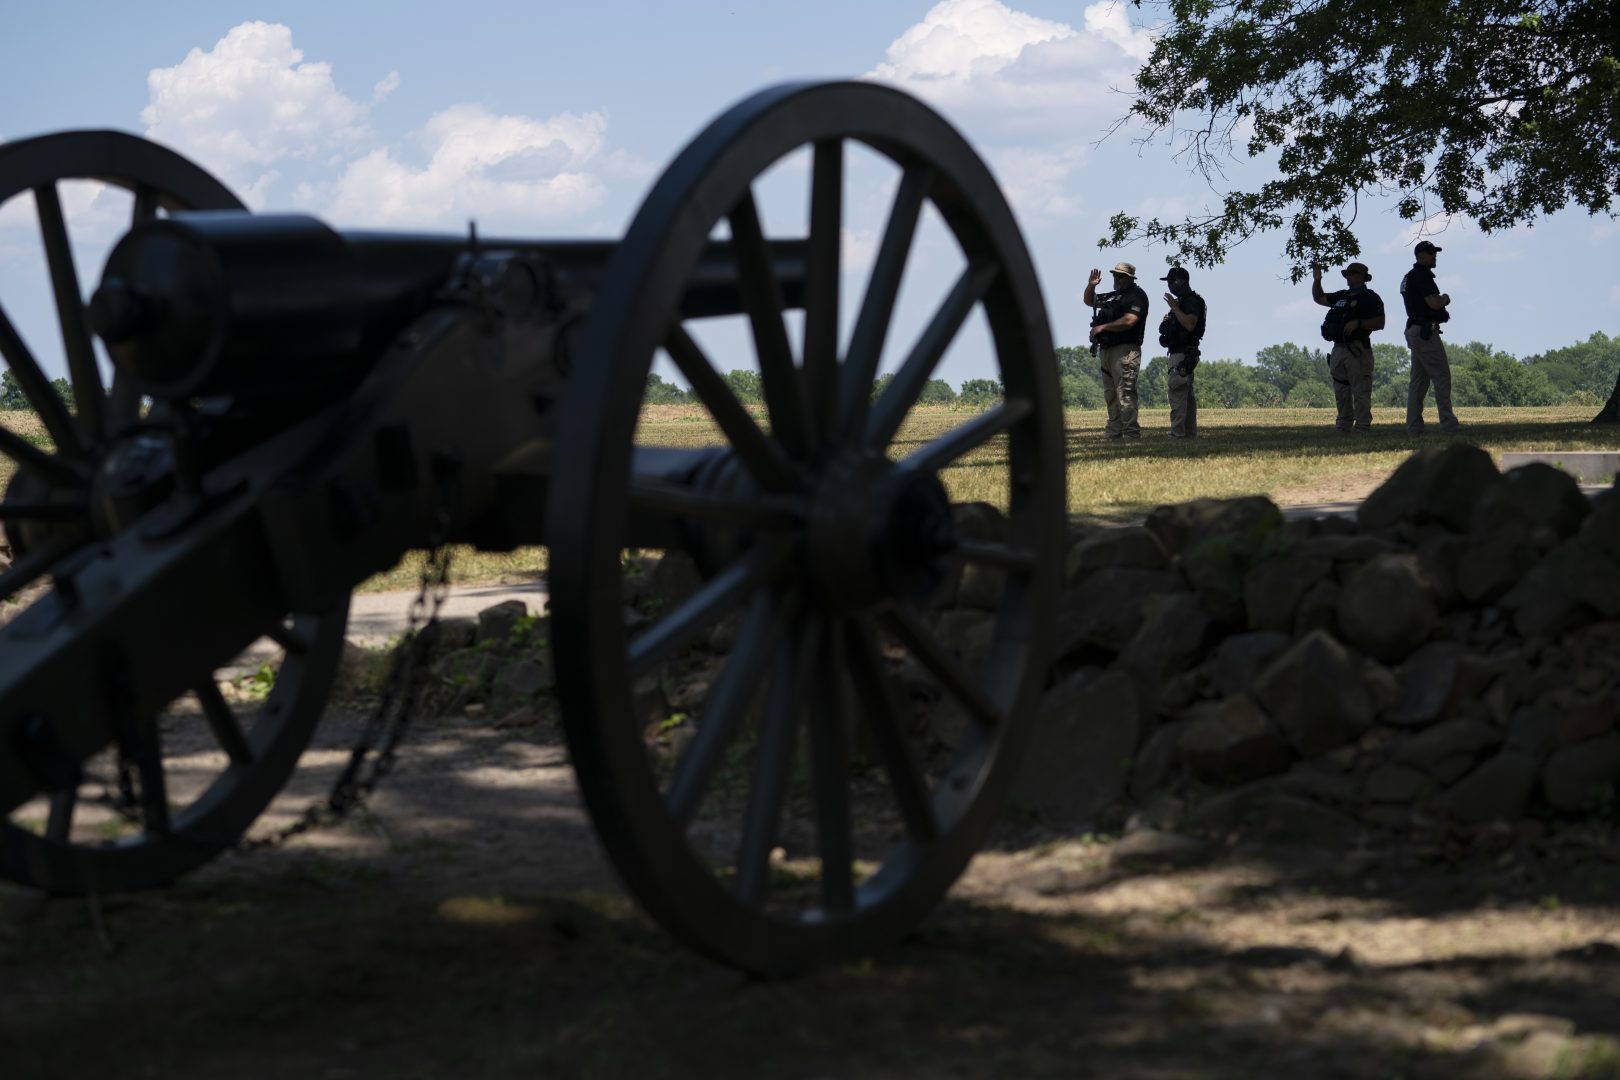 Members of a Department of Homeland Security police force stand guard at the North Carolina monument in the Gettysburg National Military Park Saturday, July 4, 2020 in Gettysburg.